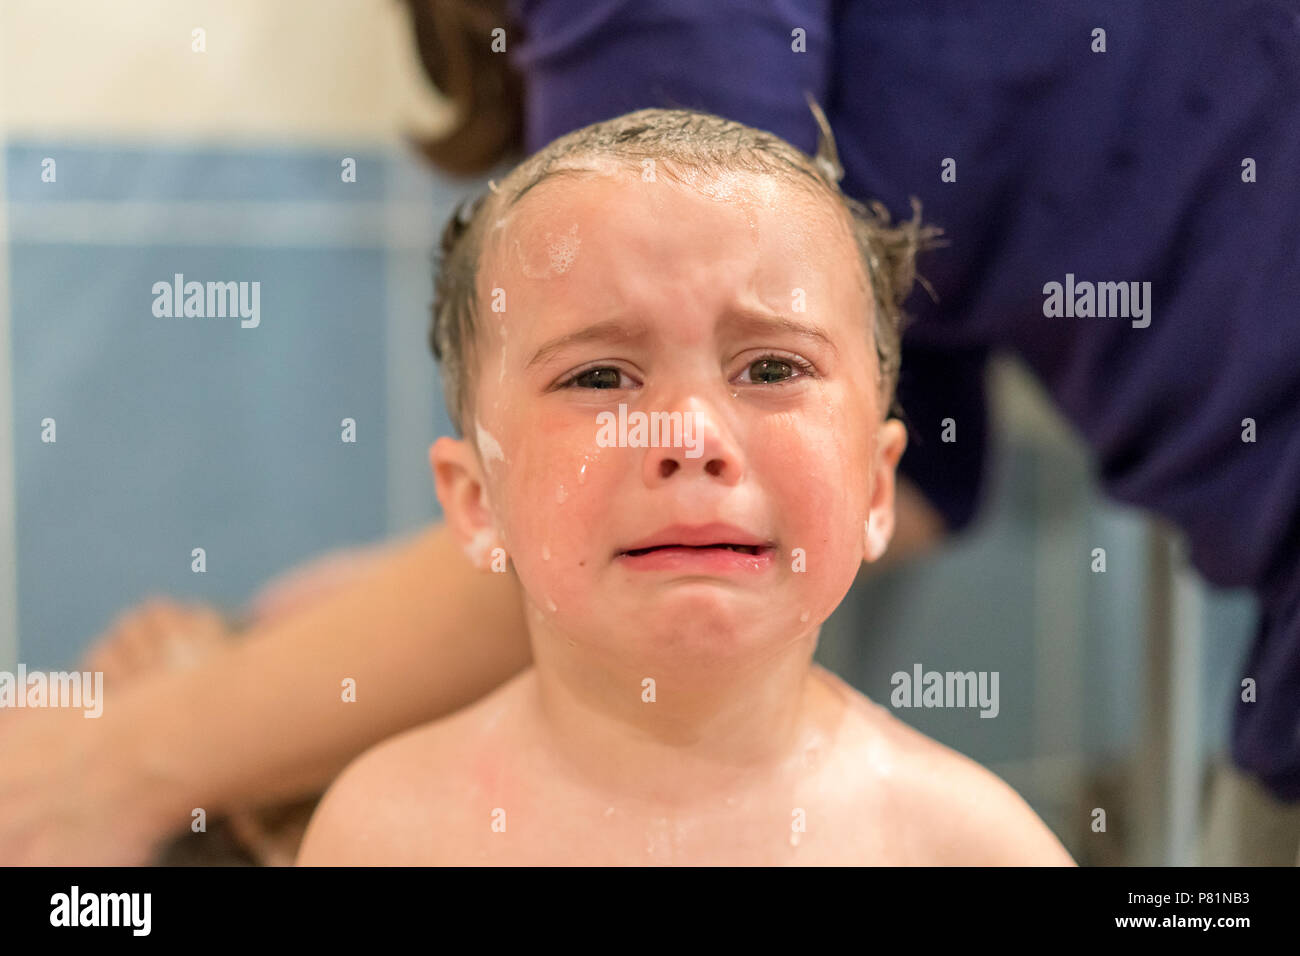 baby cries after bath